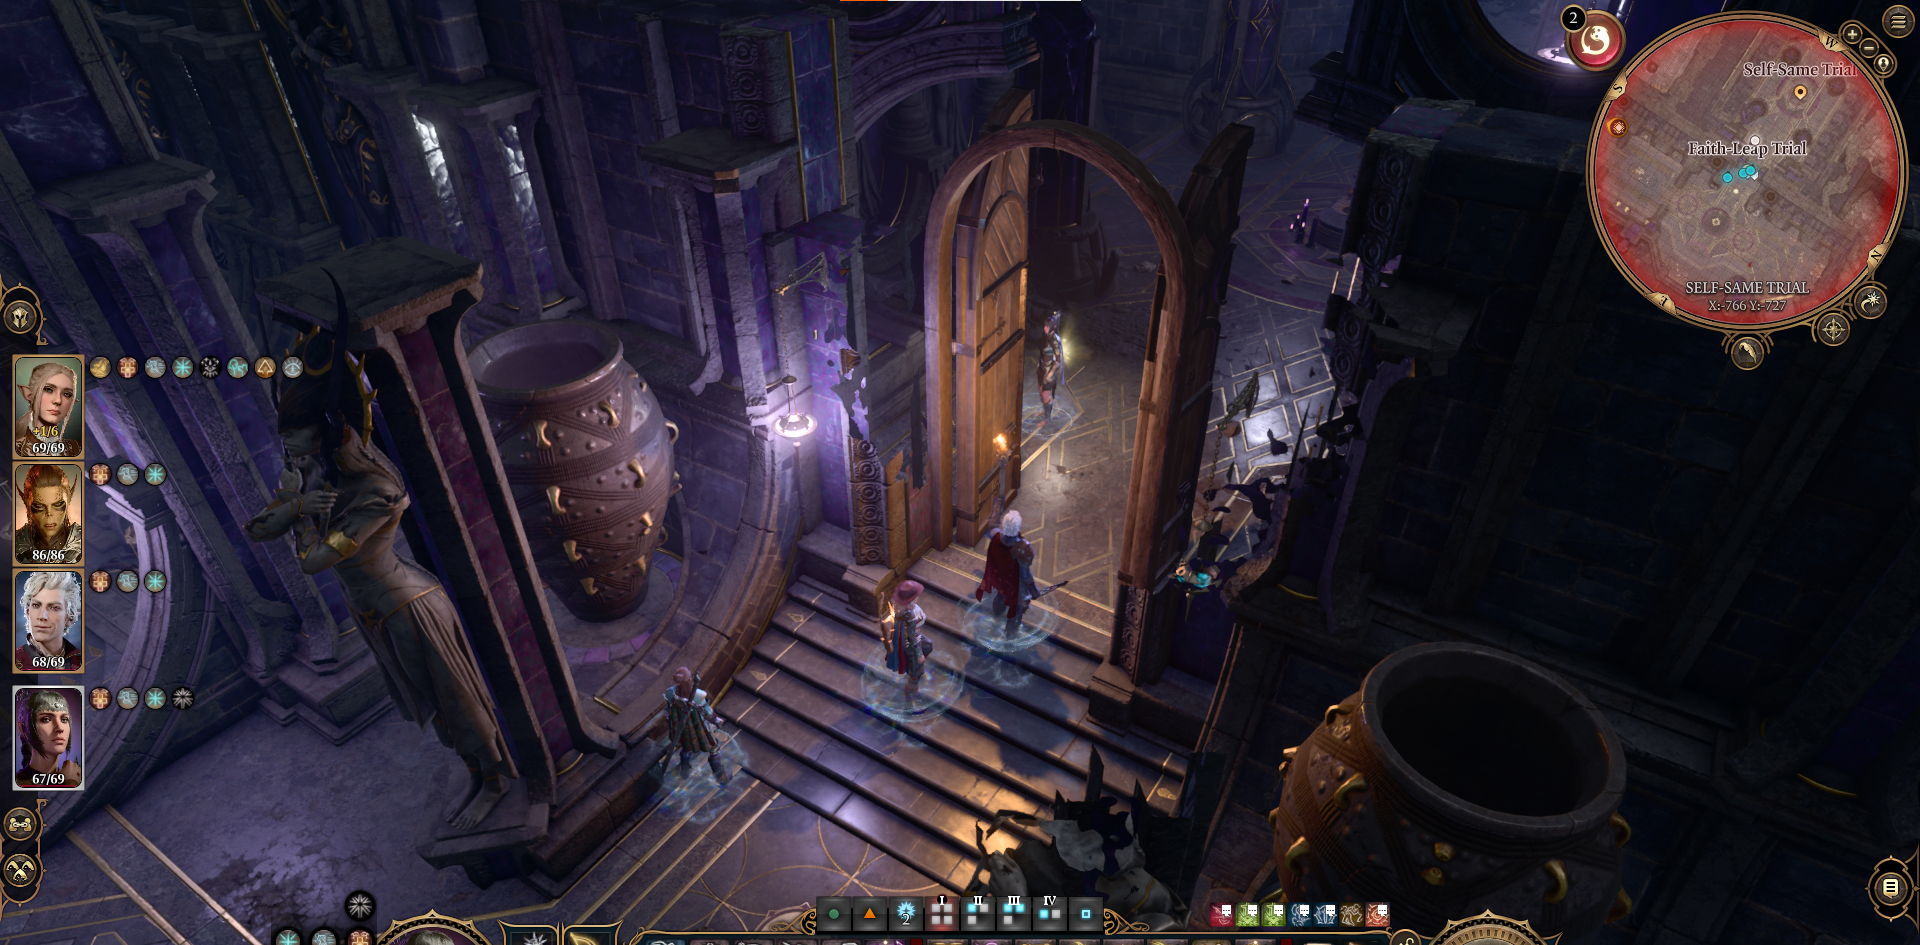 A screenshot showing an open Bulky Door leading to the Self-Same Trial room. 